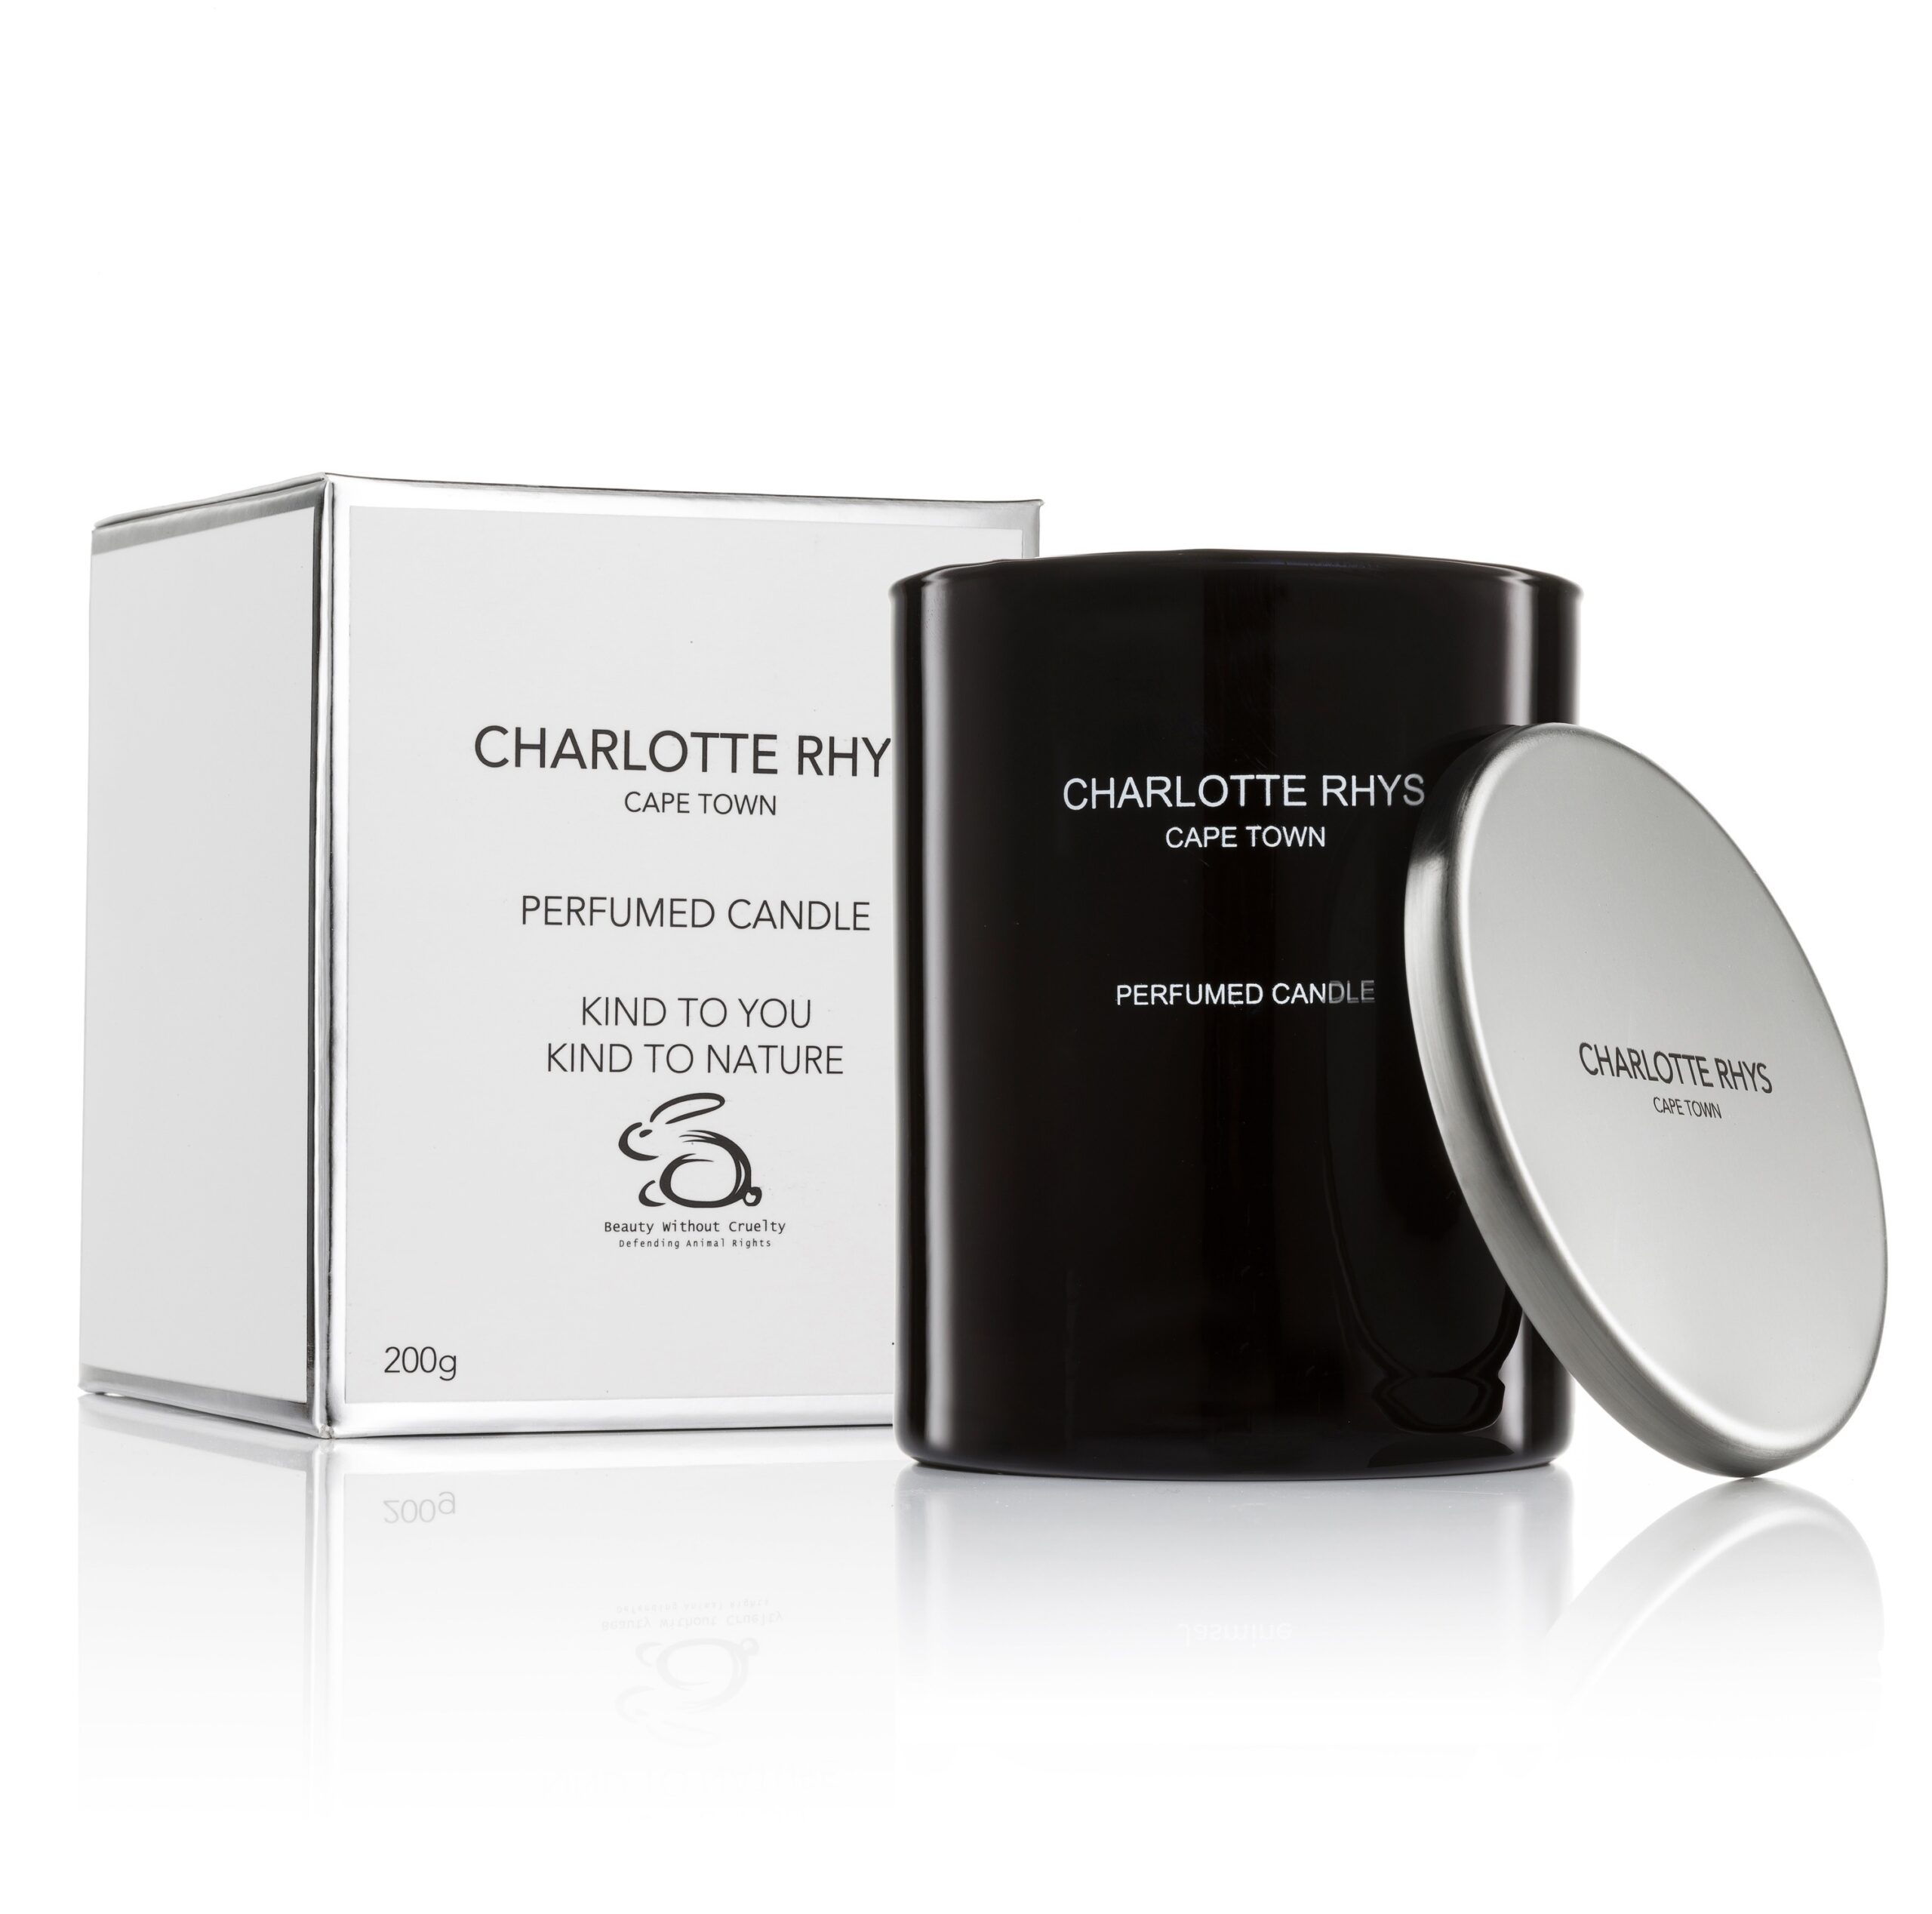 Charlotte Rhys Victor Perfumed Candle 200g